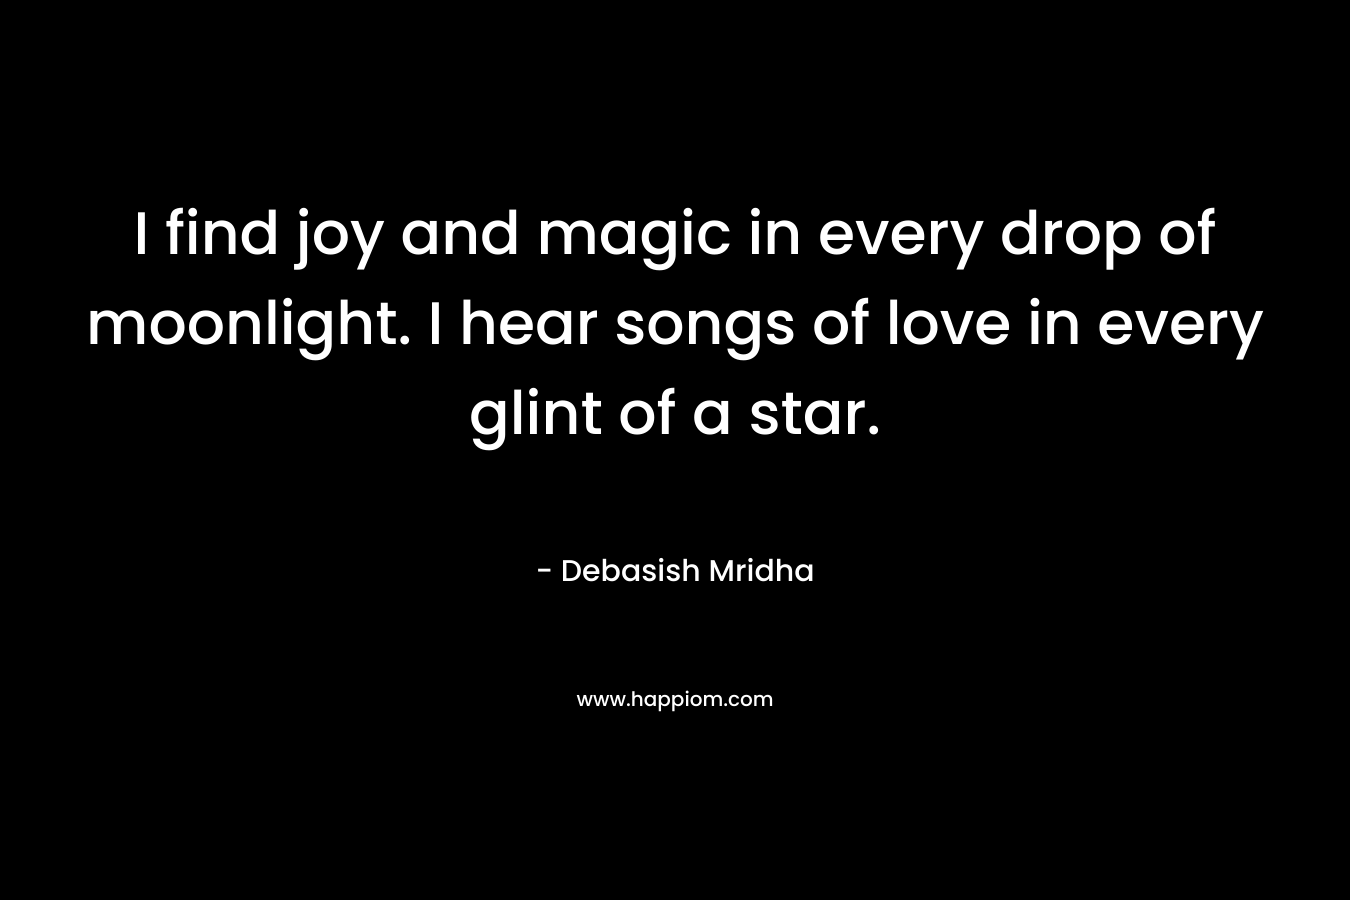 I find joy and magic in every drop of moonlight. I hear songs of love in every glint of a star. – Debasish Mridha